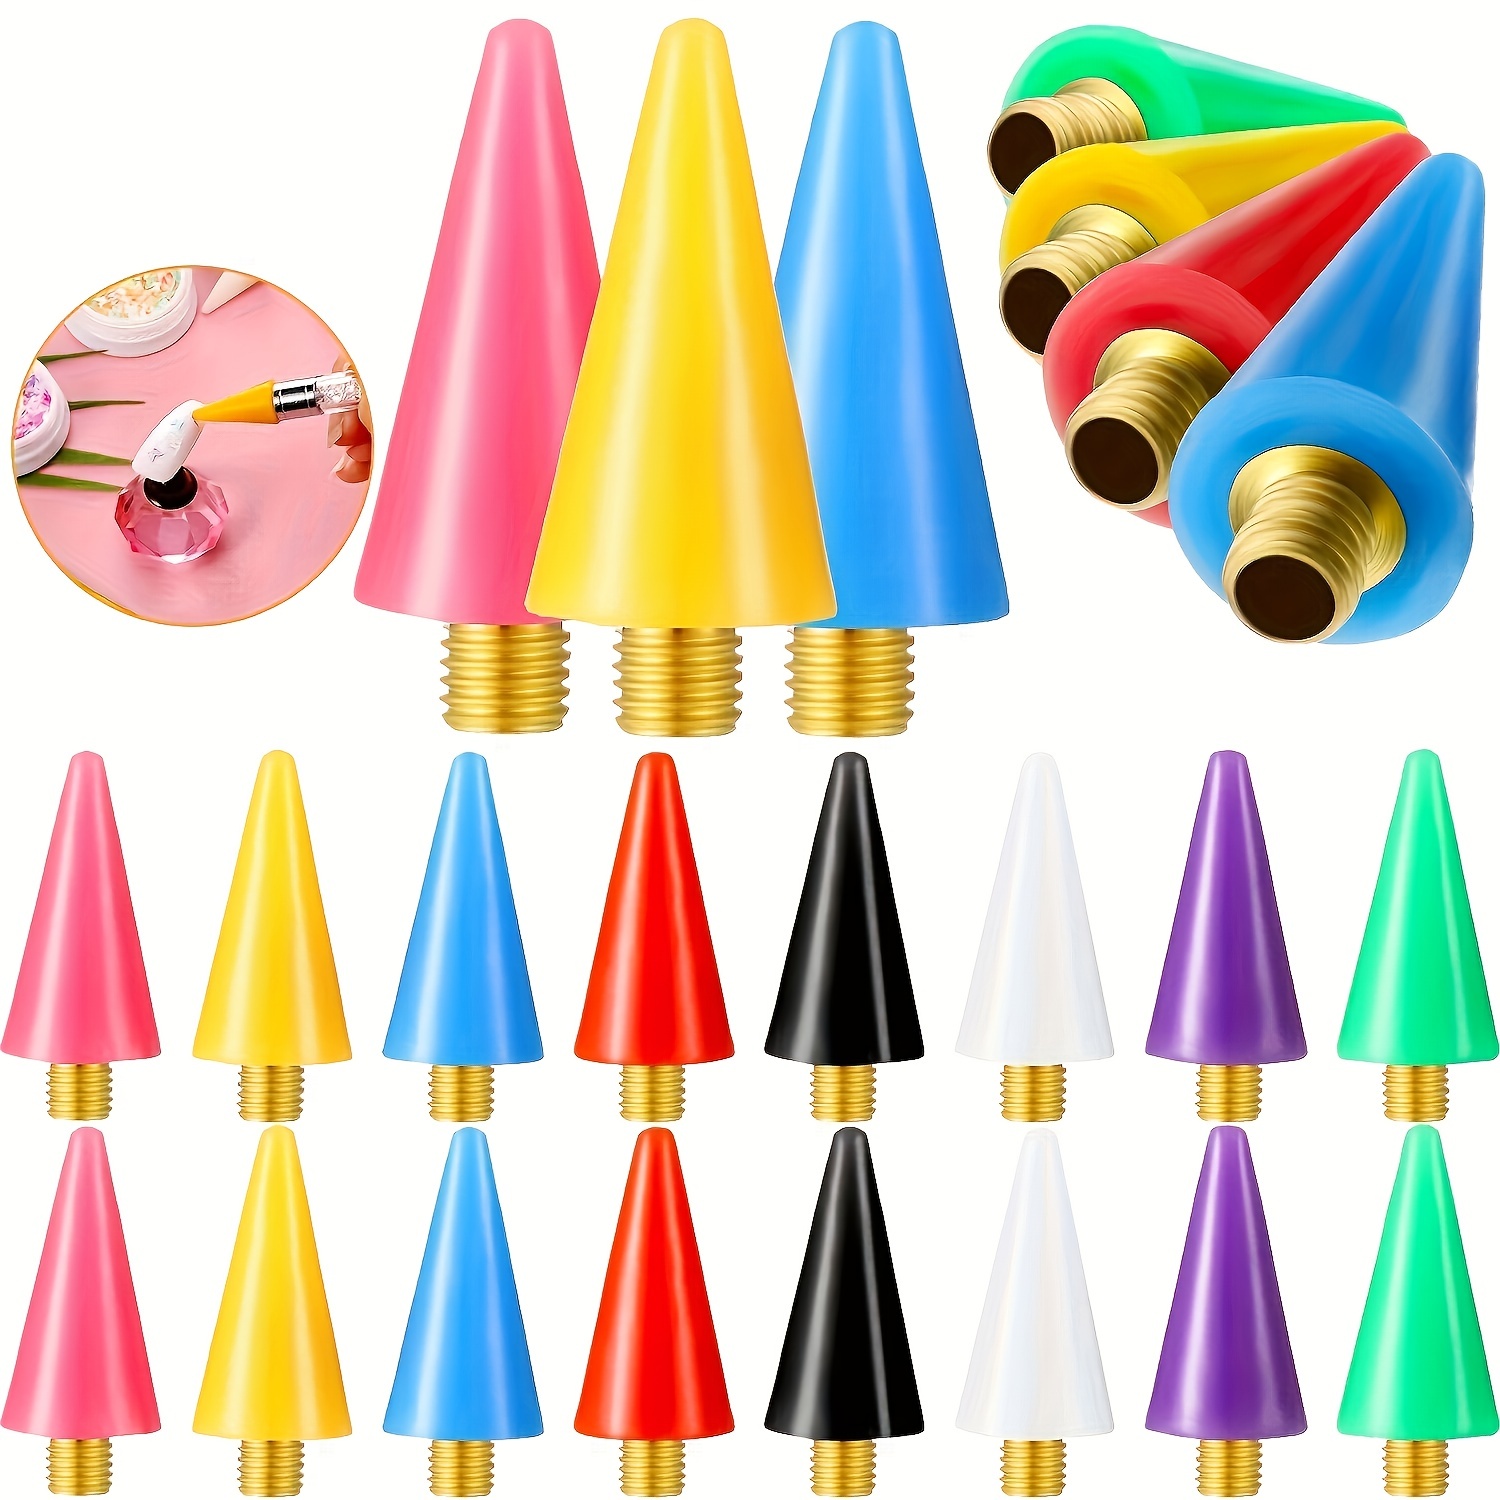 Diamond Painting Accessories Art Tool-42 Diamond Painting Glue Clay-DIY  Embroidery Wax Tacky Kit-4 Stitch Dot Pen for Craft 5D Cross(60 Number